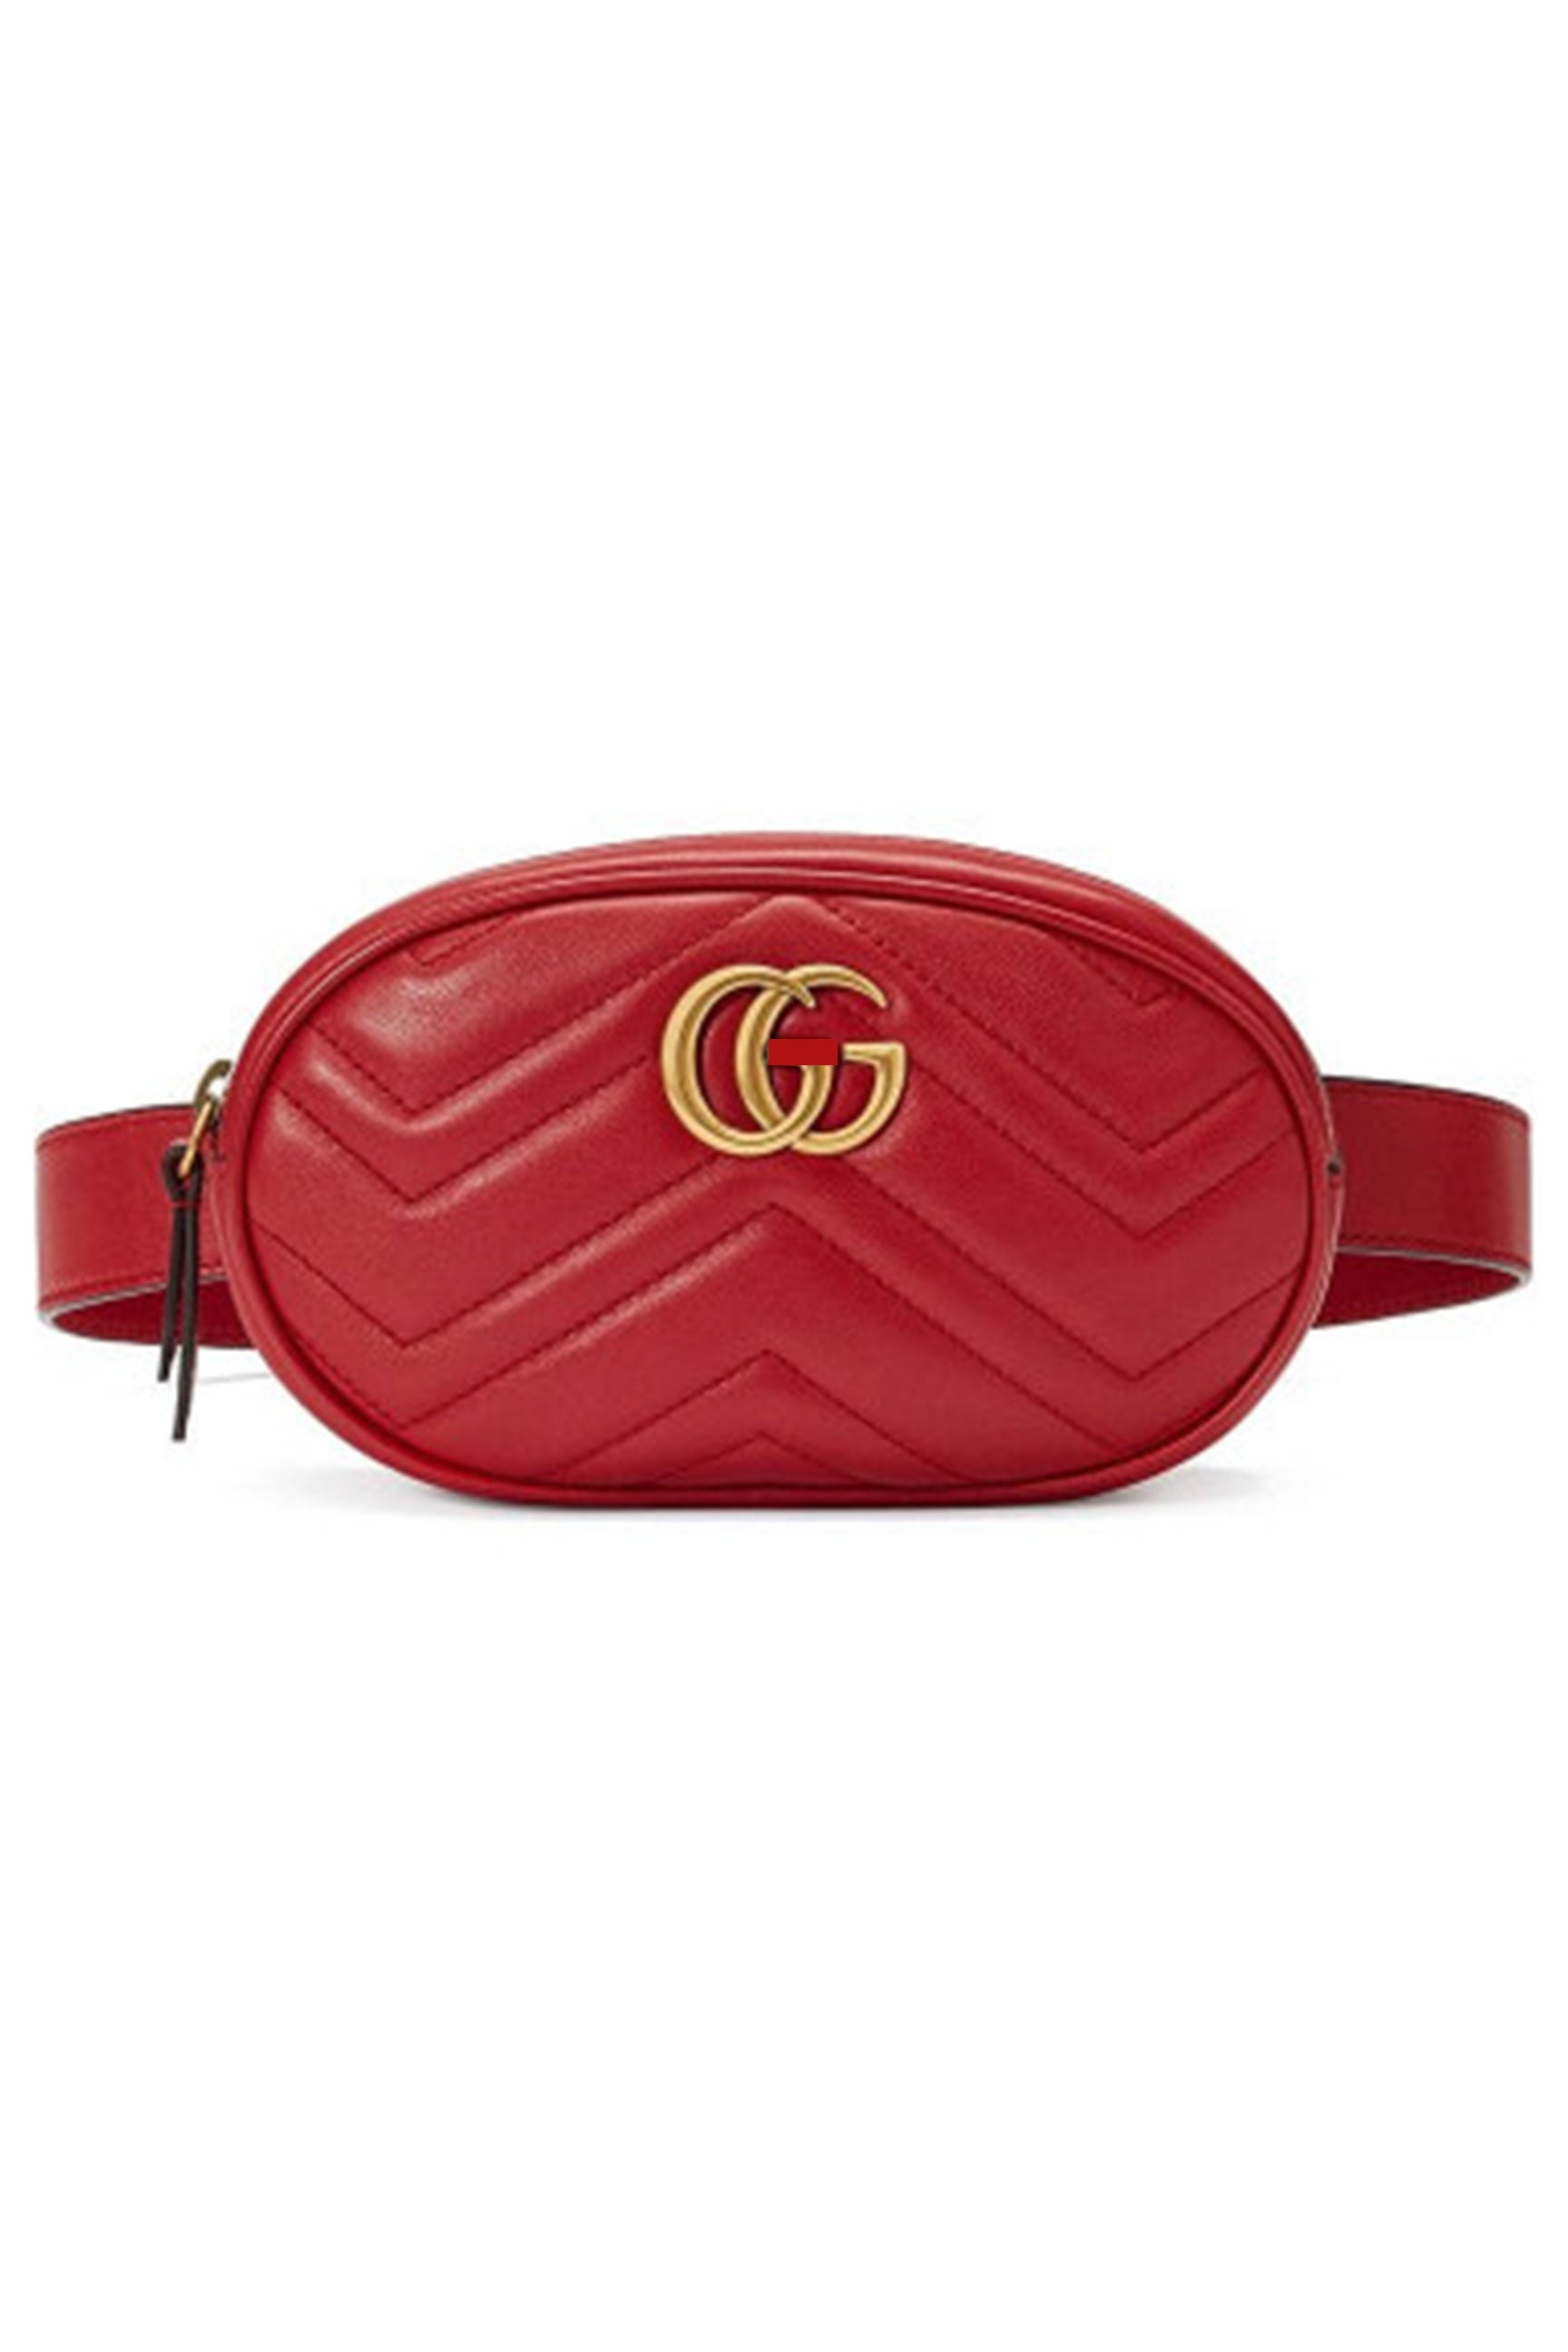 GG Fanny Pack Red – MY SEXY STYLES